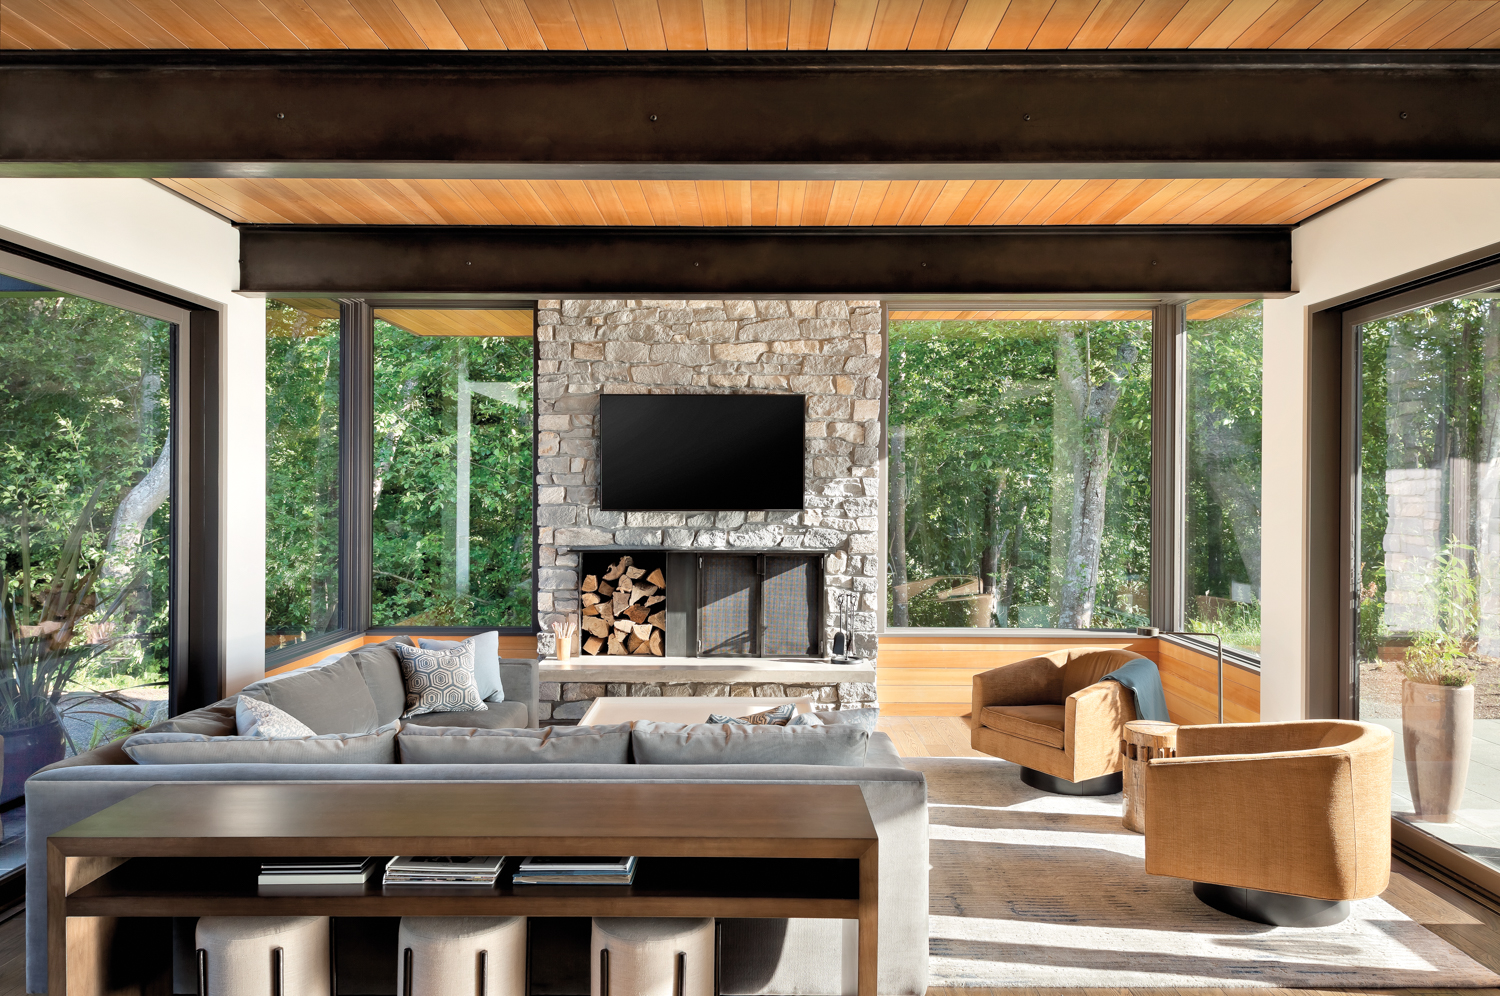 A living room is surrounded by windows and has a centrally located stone fireplace.